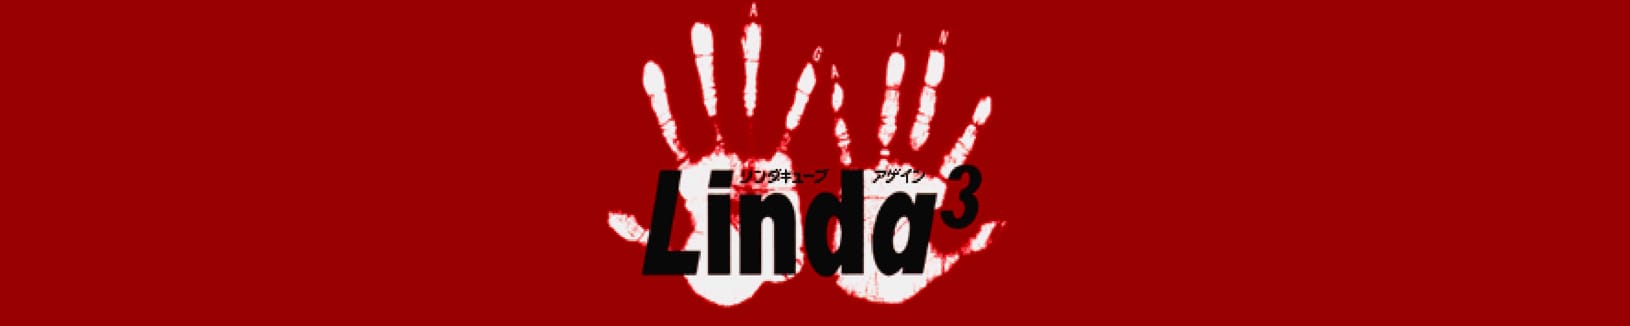 Inside the 10 years it took to translate – and fully understand – one-of-a-kind RPG Linda Cube Again